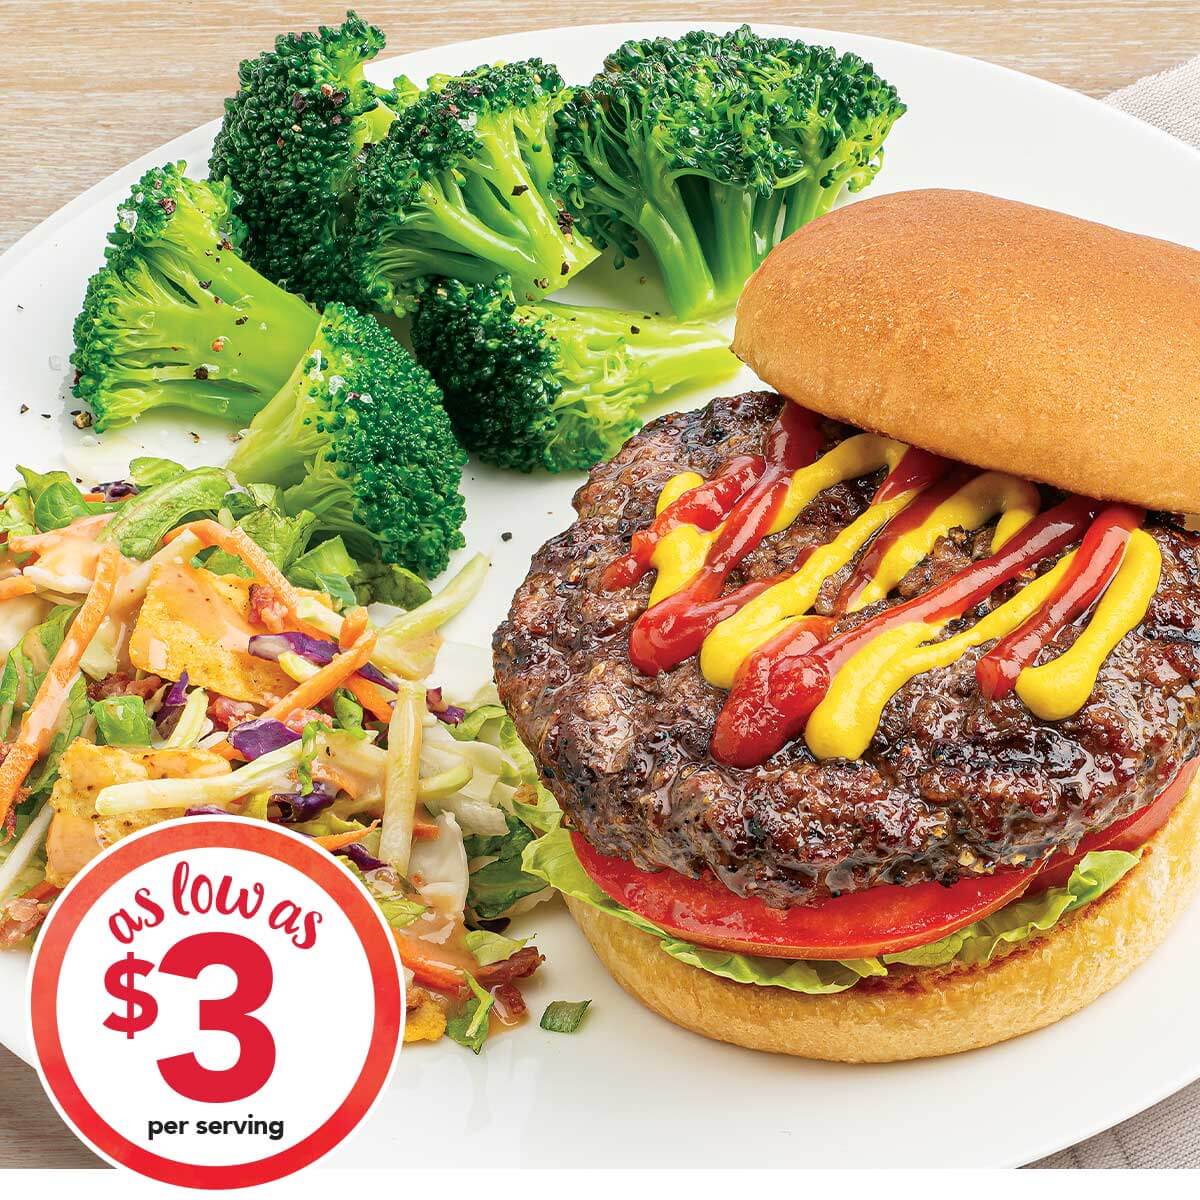 Burger with Chopped Salad and Broccoli as low as $3.00 per serving